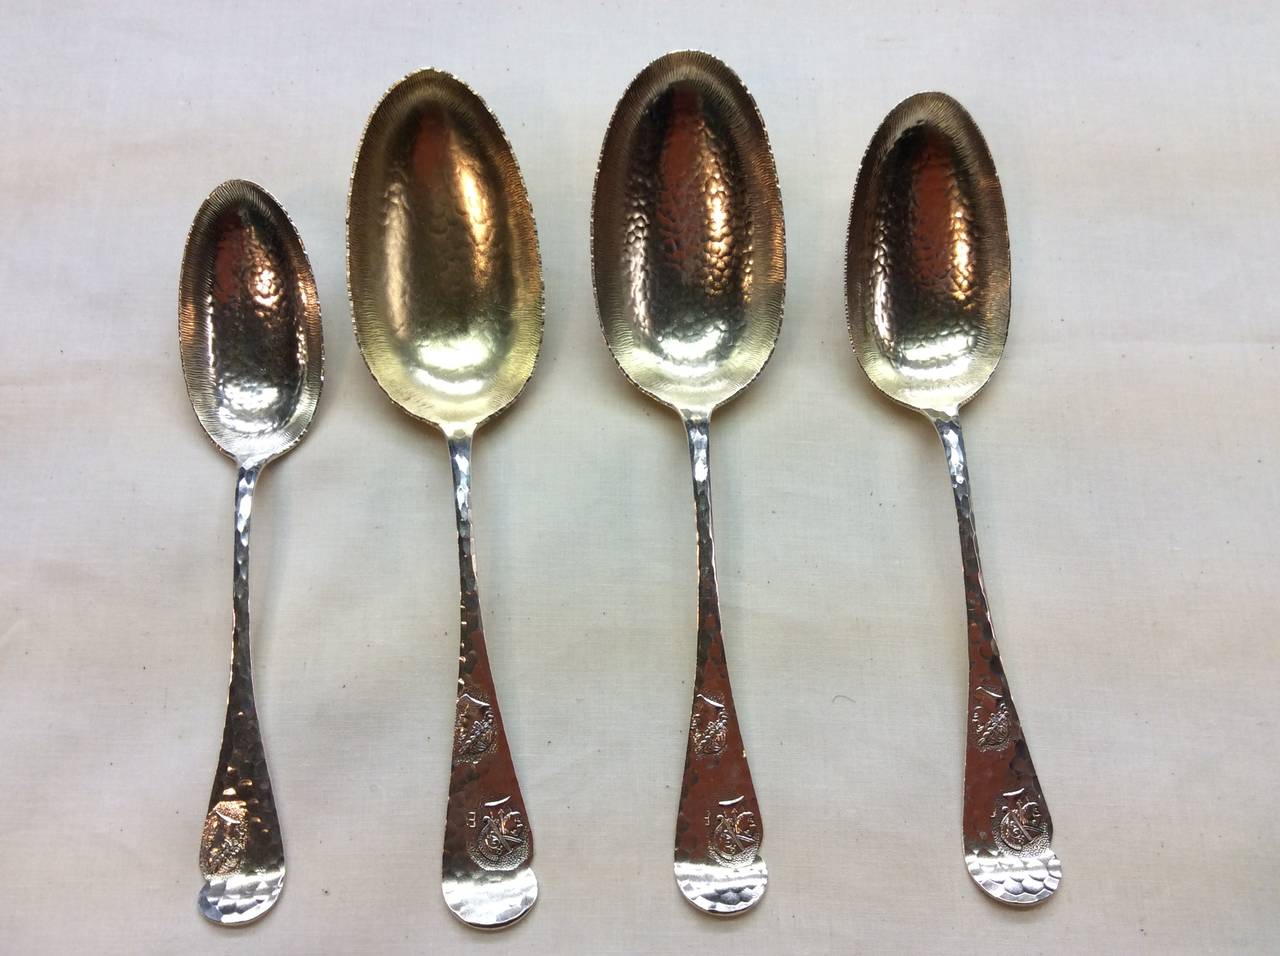 Aesthetic/ Medallion patent Sterling Sliver Serving Spoons retaining original gold wash to bowl. Circa 1880
In the 'antique' style, each hammer-faceted with profile masks on handle.
From the collection of Sam Wagstaff of Collection of American